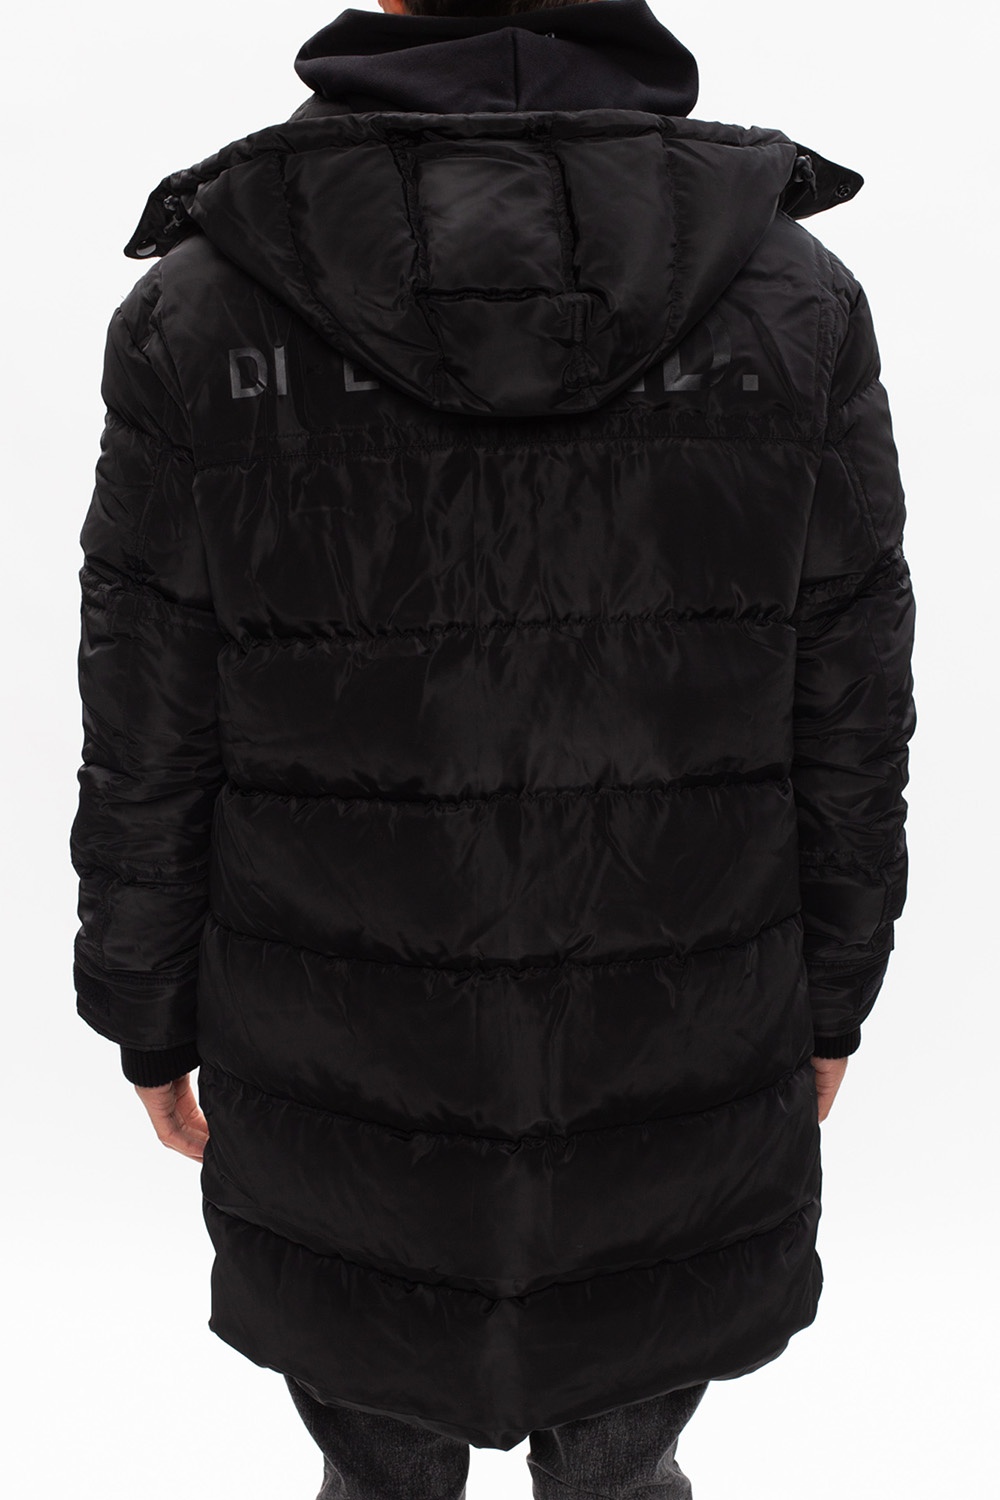 Diesel 'W-Russell' quilted down jacket | Men's Clothing | Vitkac